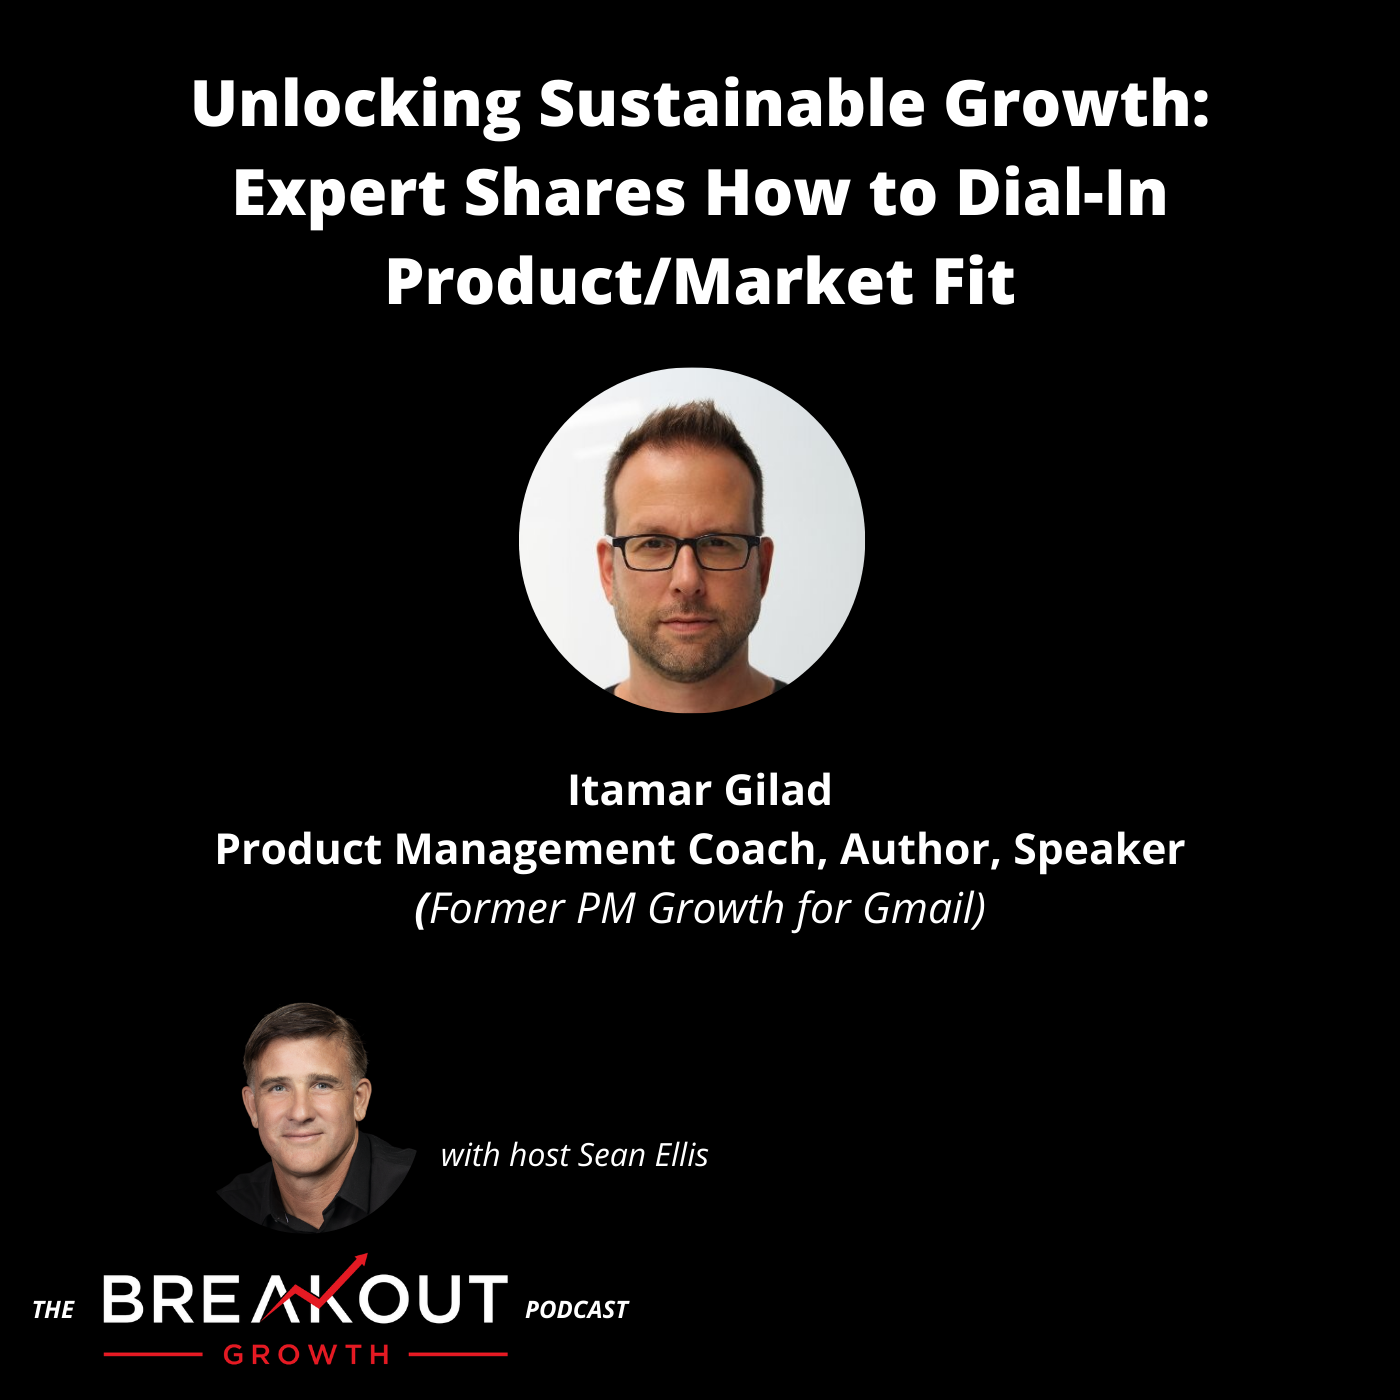 Unlocking Sustainable Growth: Expert Shares How to Dial In Product/Market Fit